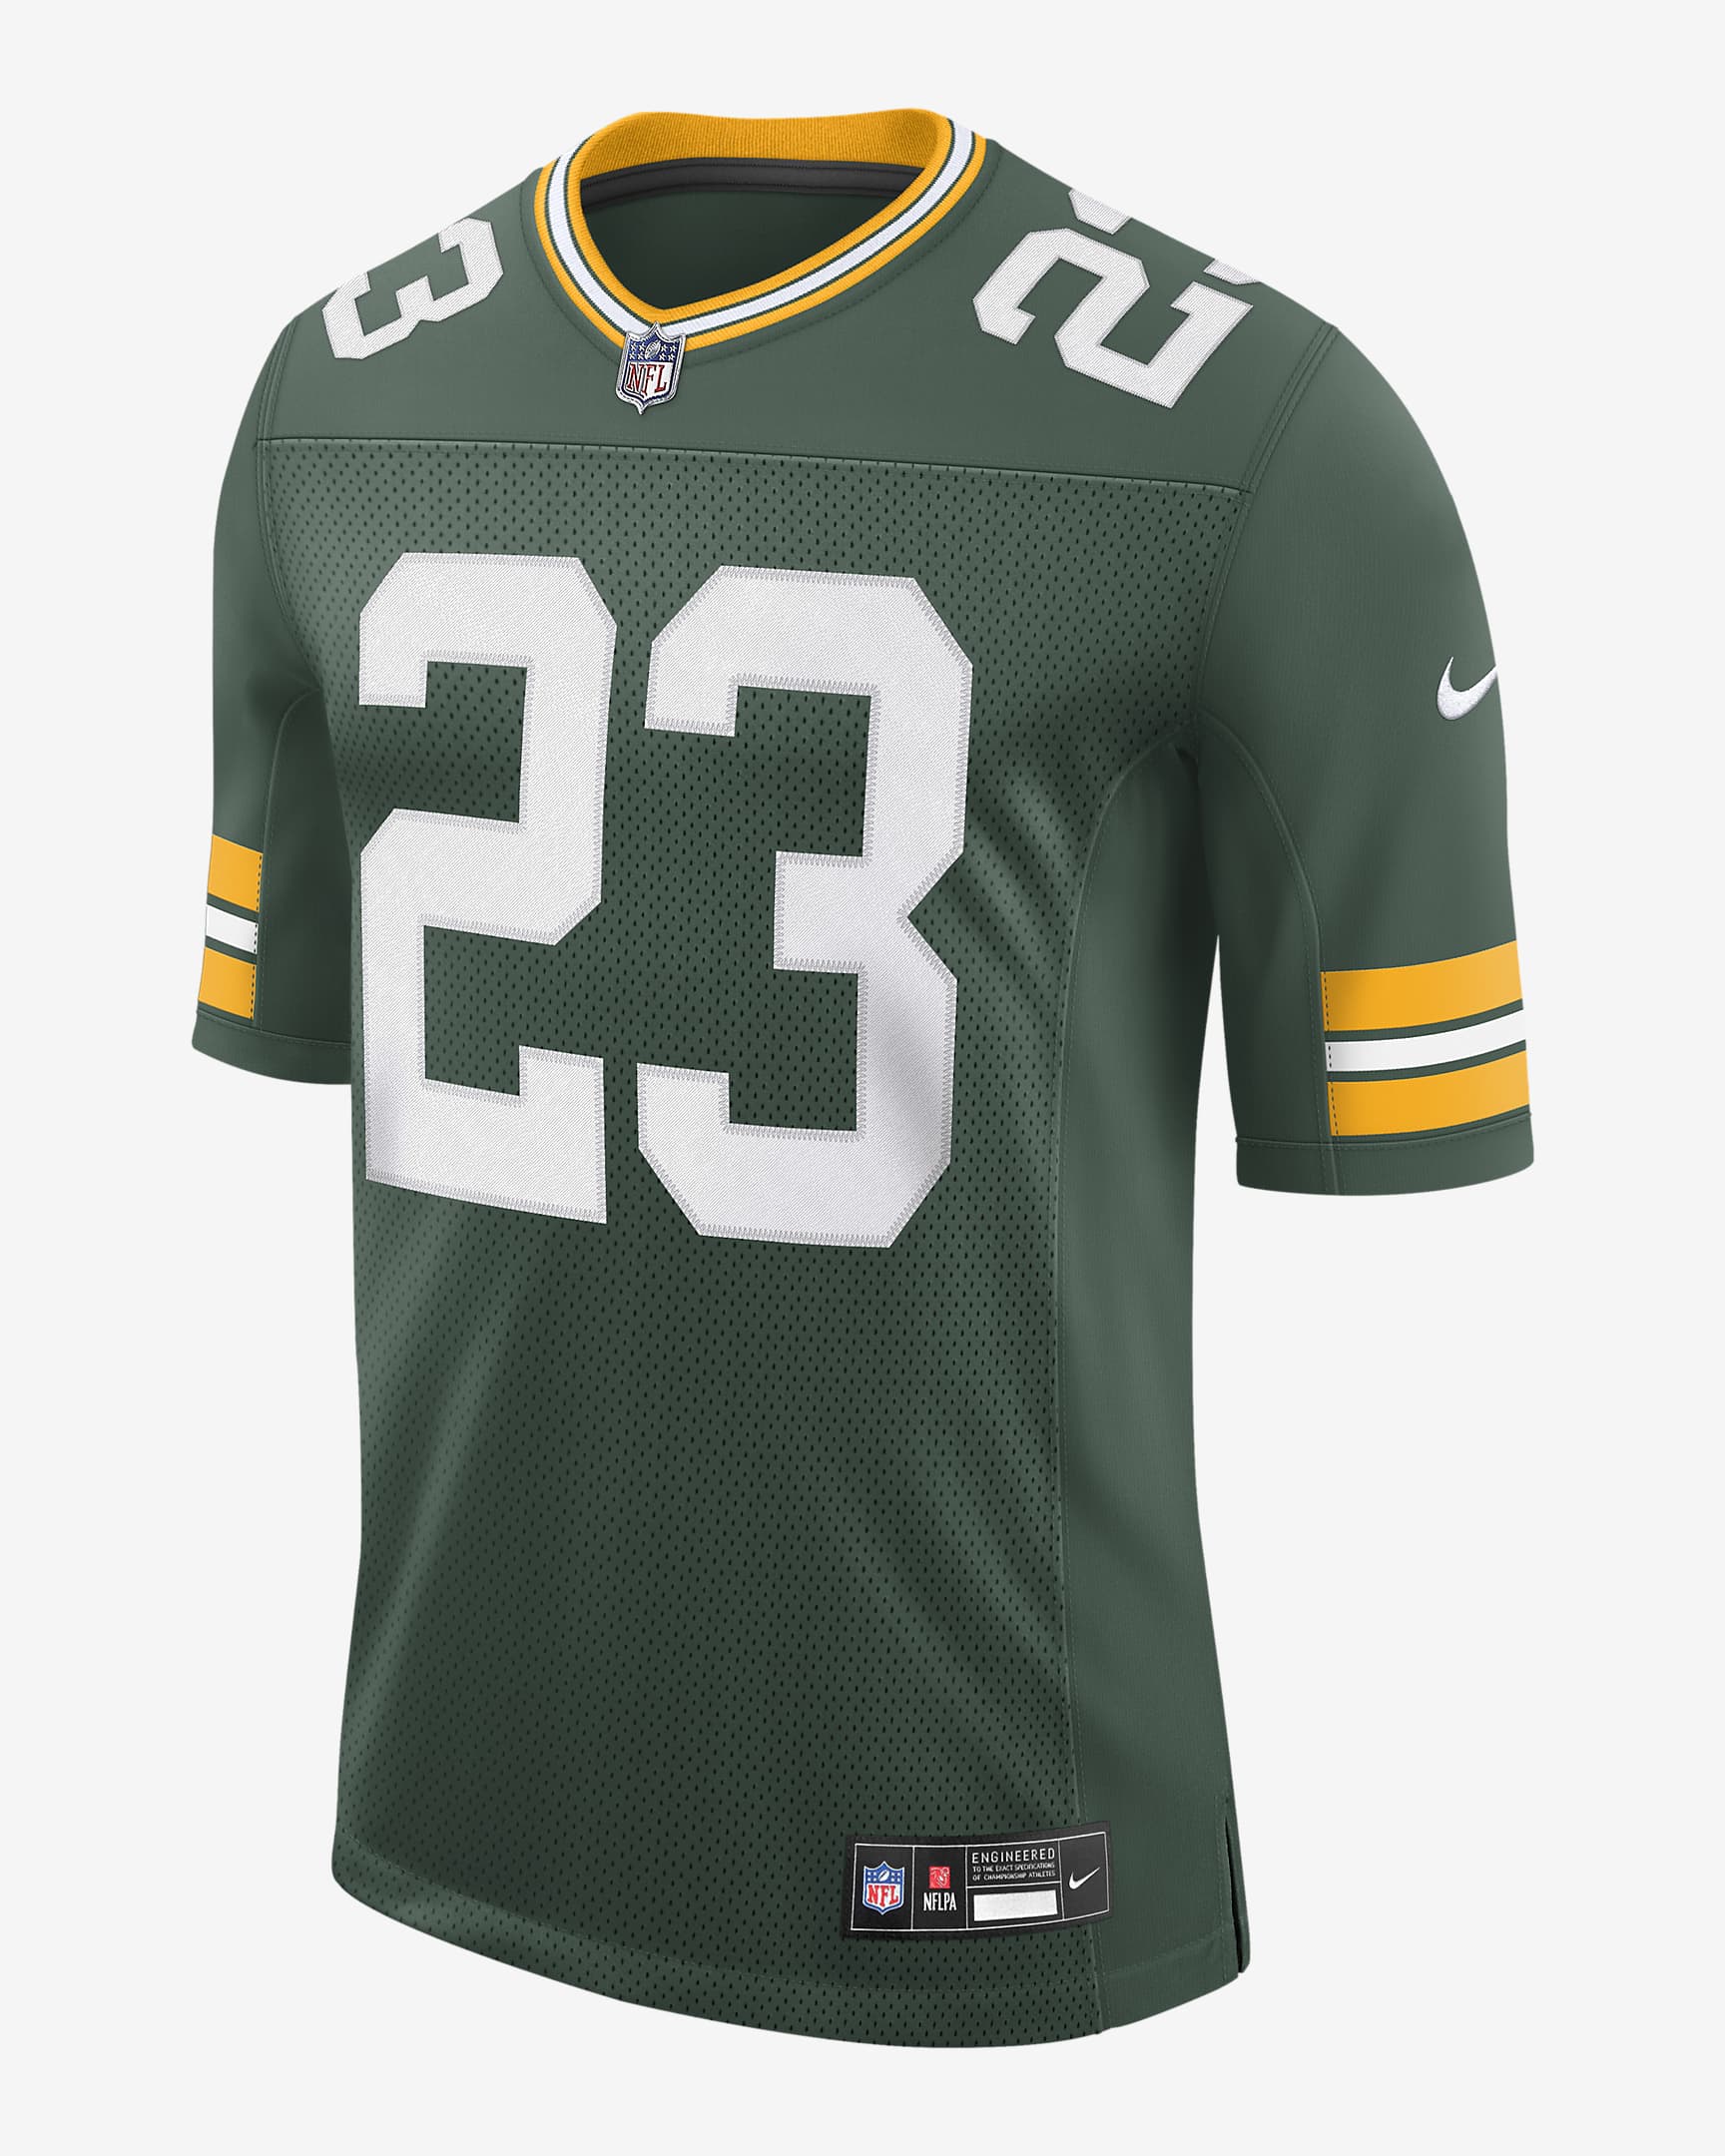 Jaire Alexander Green Bay Packers Men's Nike Dri-FIT NFL Limited Jersey ...